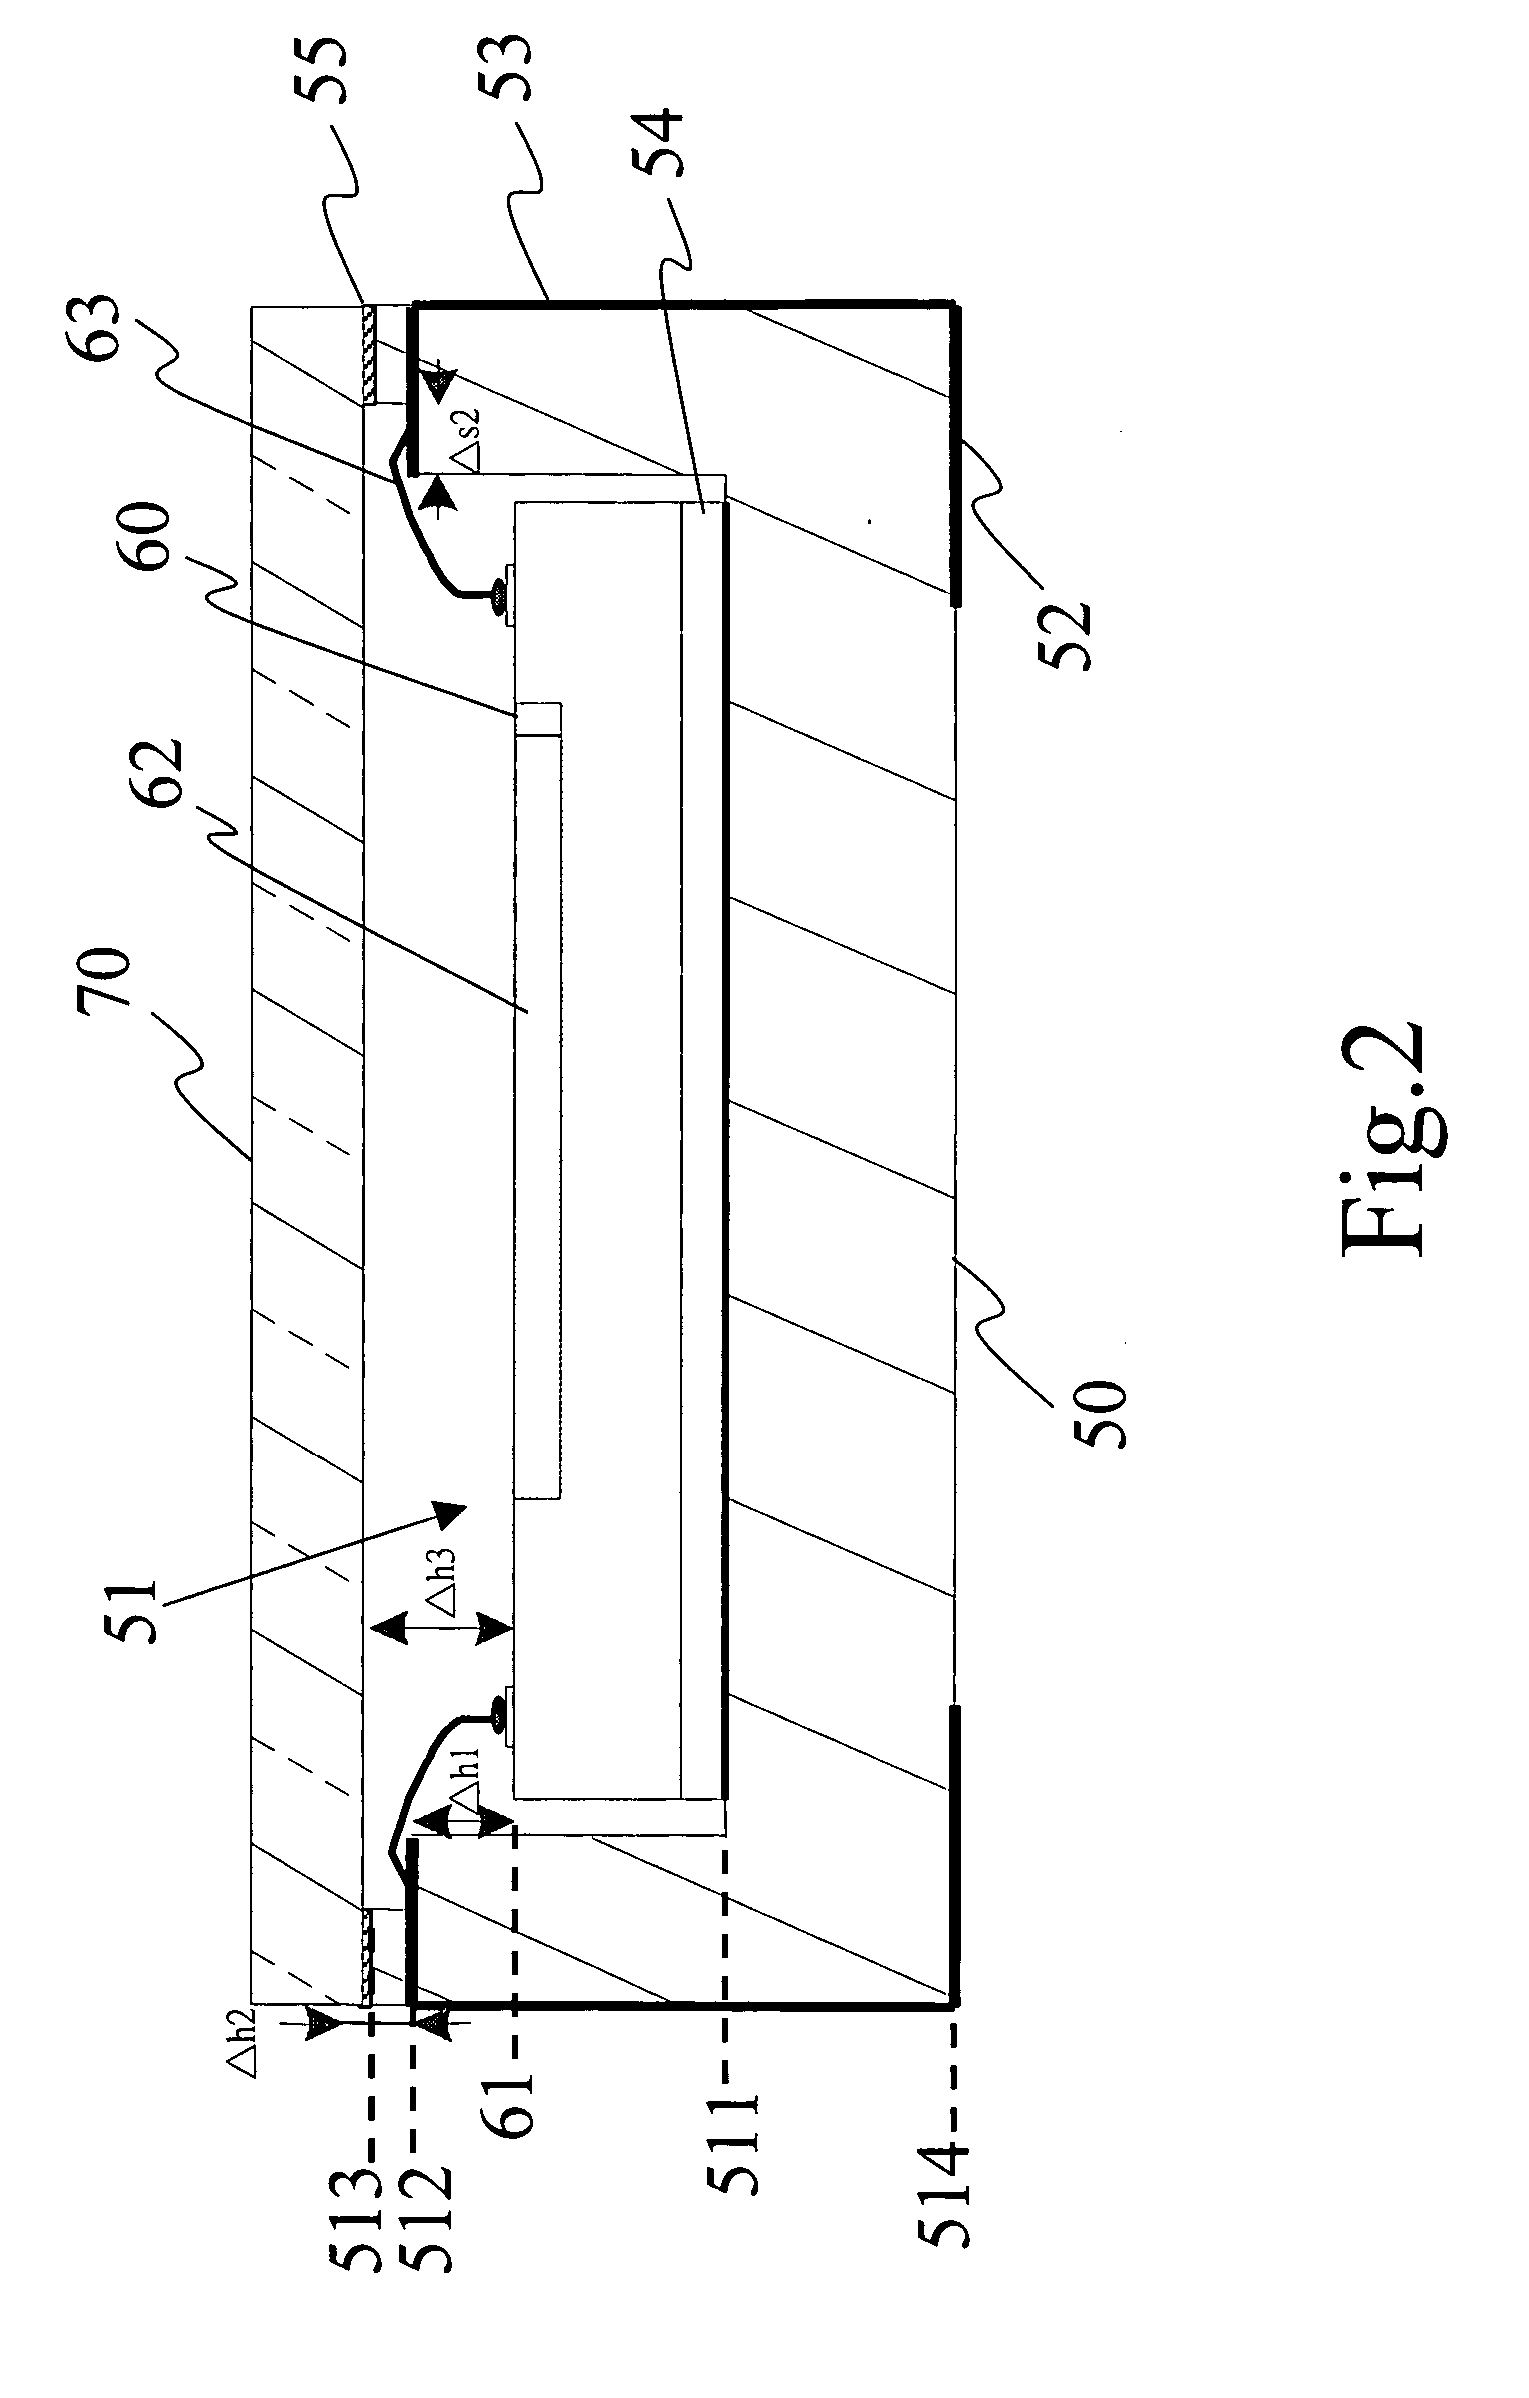 Image sensing device package structure